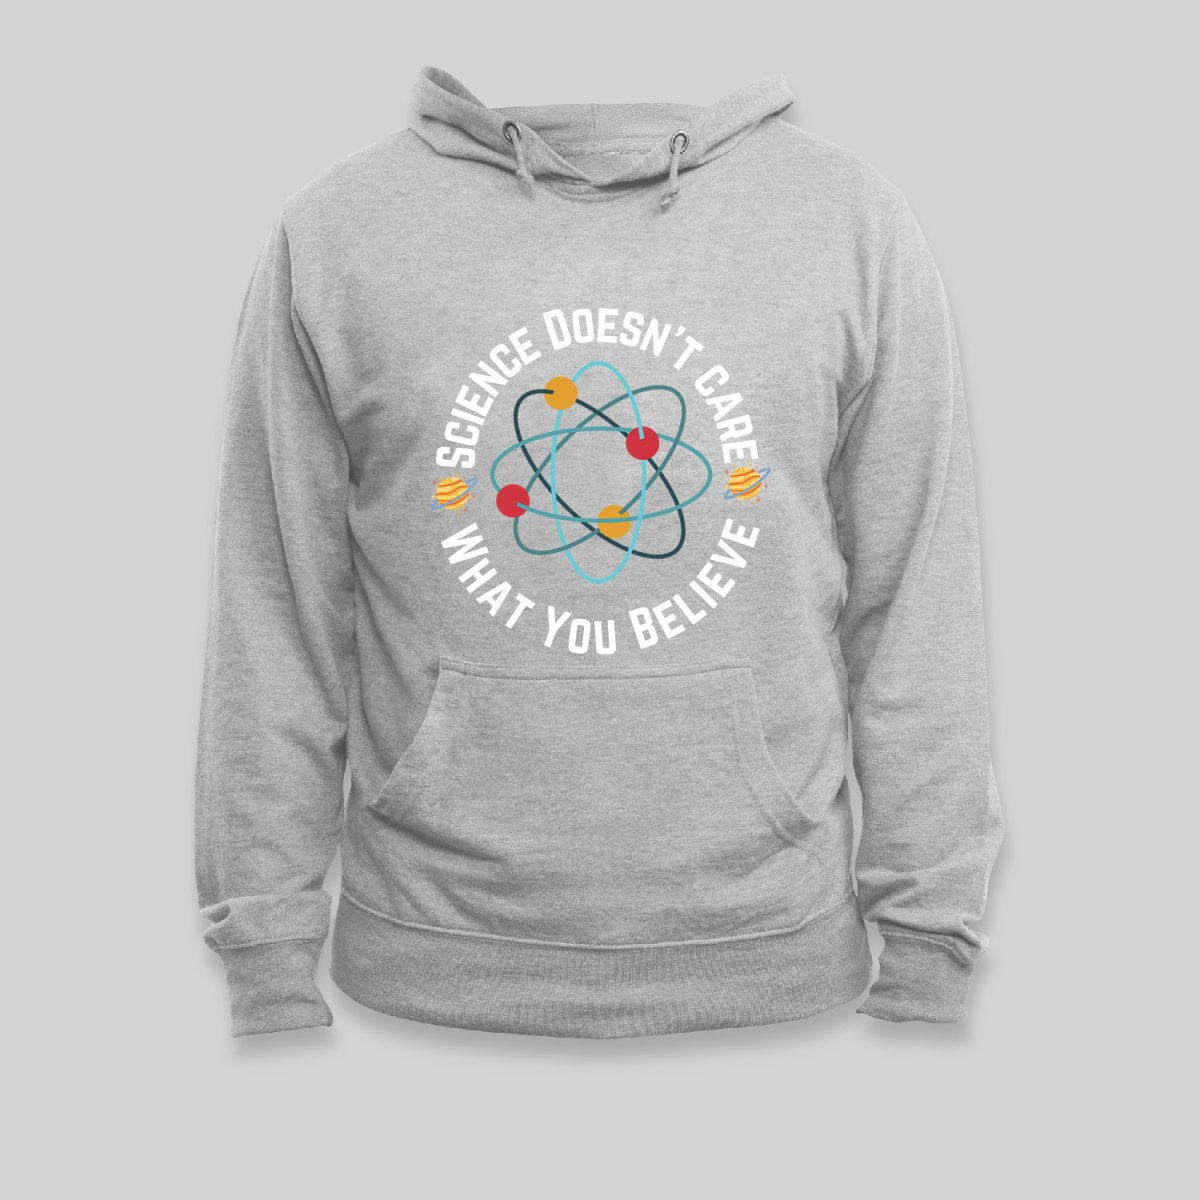 Science doesn't care what you believe Hoodie - Geeksoutfit